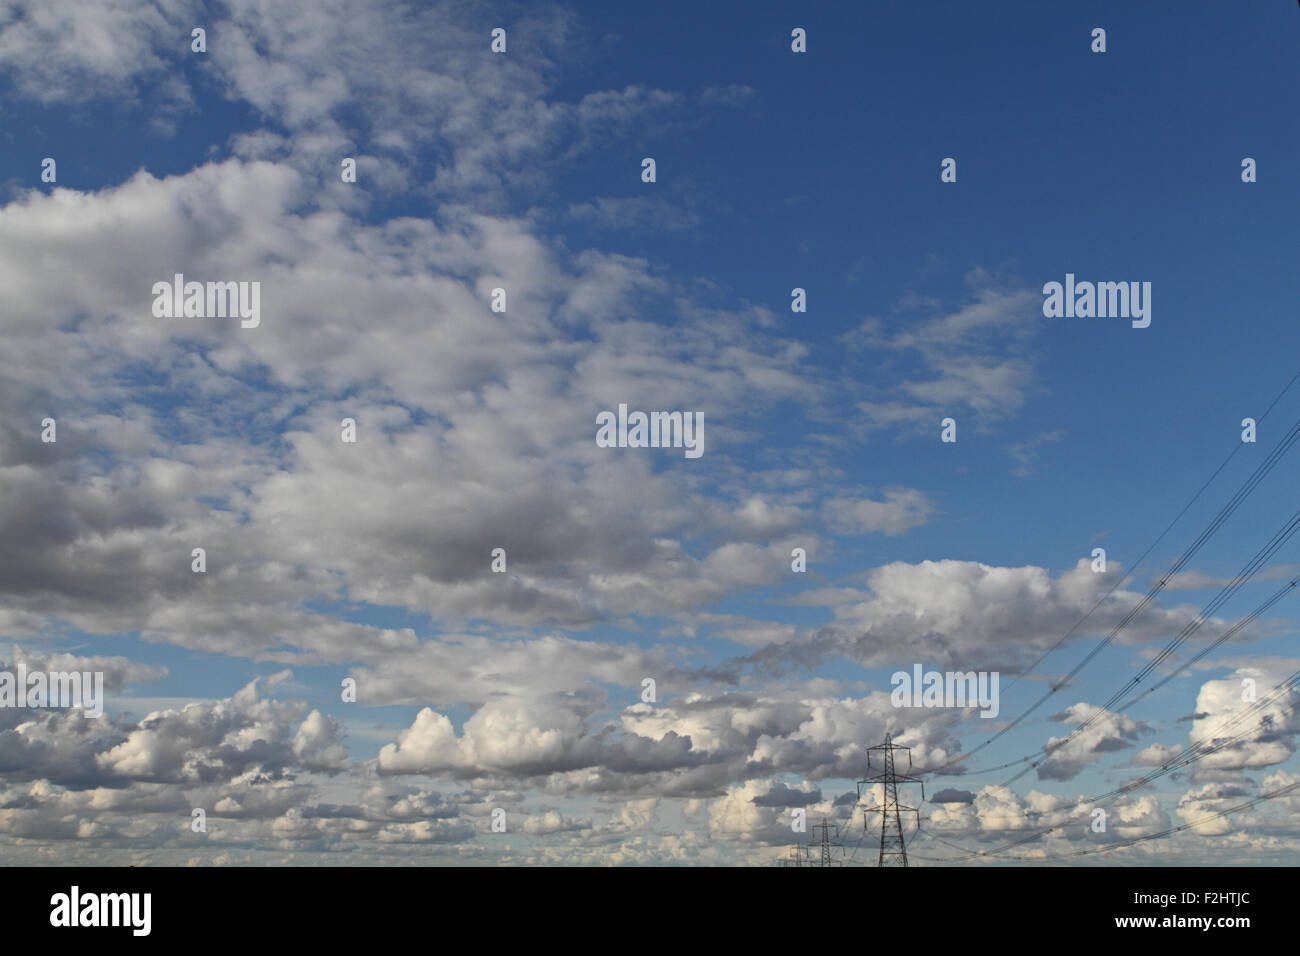 Electricity pylons against a cloudy blue sky Stock Photo